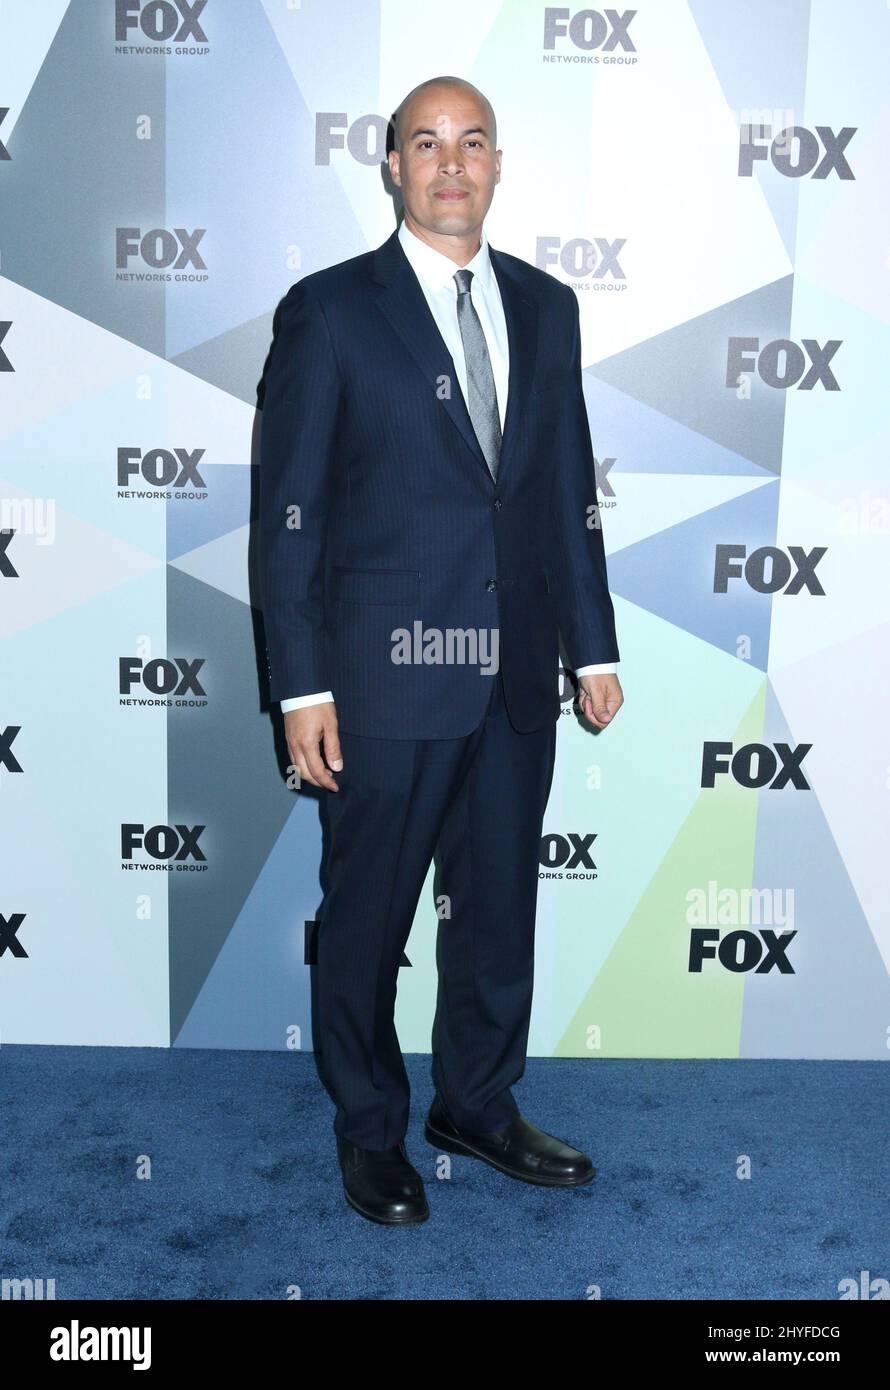 Coby Bell attending the FOX Networks 2018 Upfront held at Wollman Rink in Central Parkin New York, USA Stock Photo